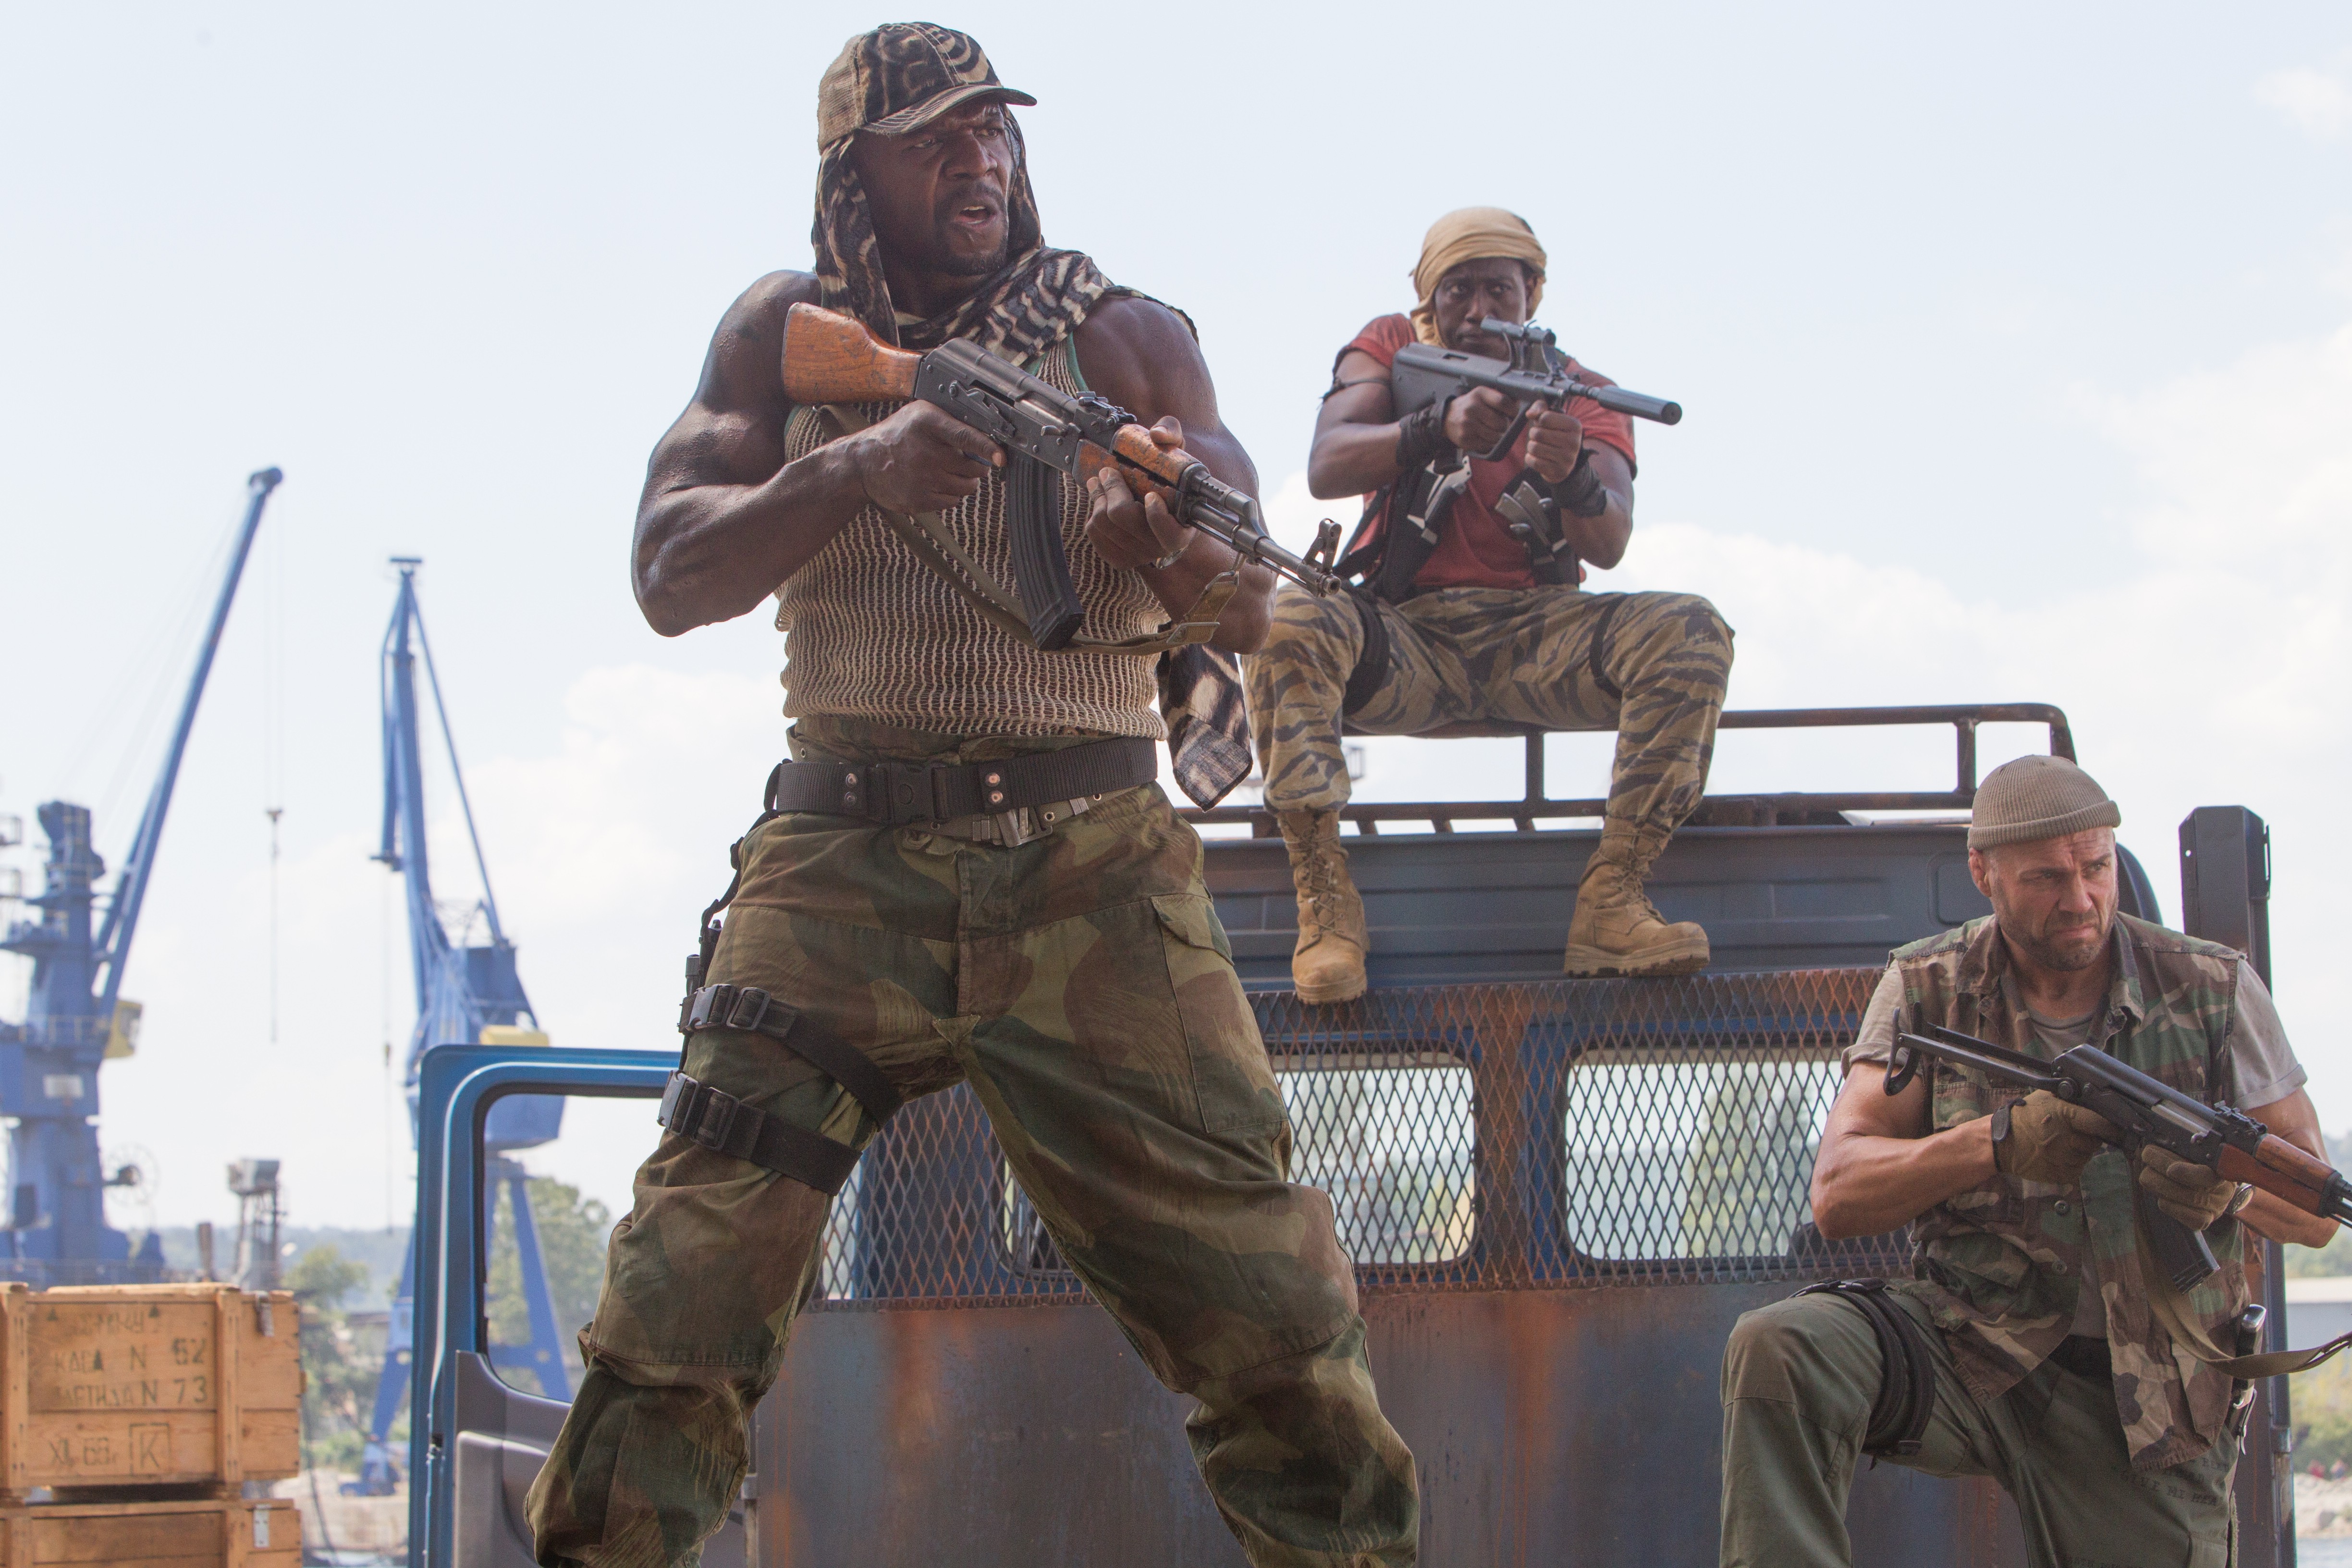 movie, the expendables 3, doc (the expendables), hale caesar, randy couture, terry crews, toll road, wesley snipes, the expendables